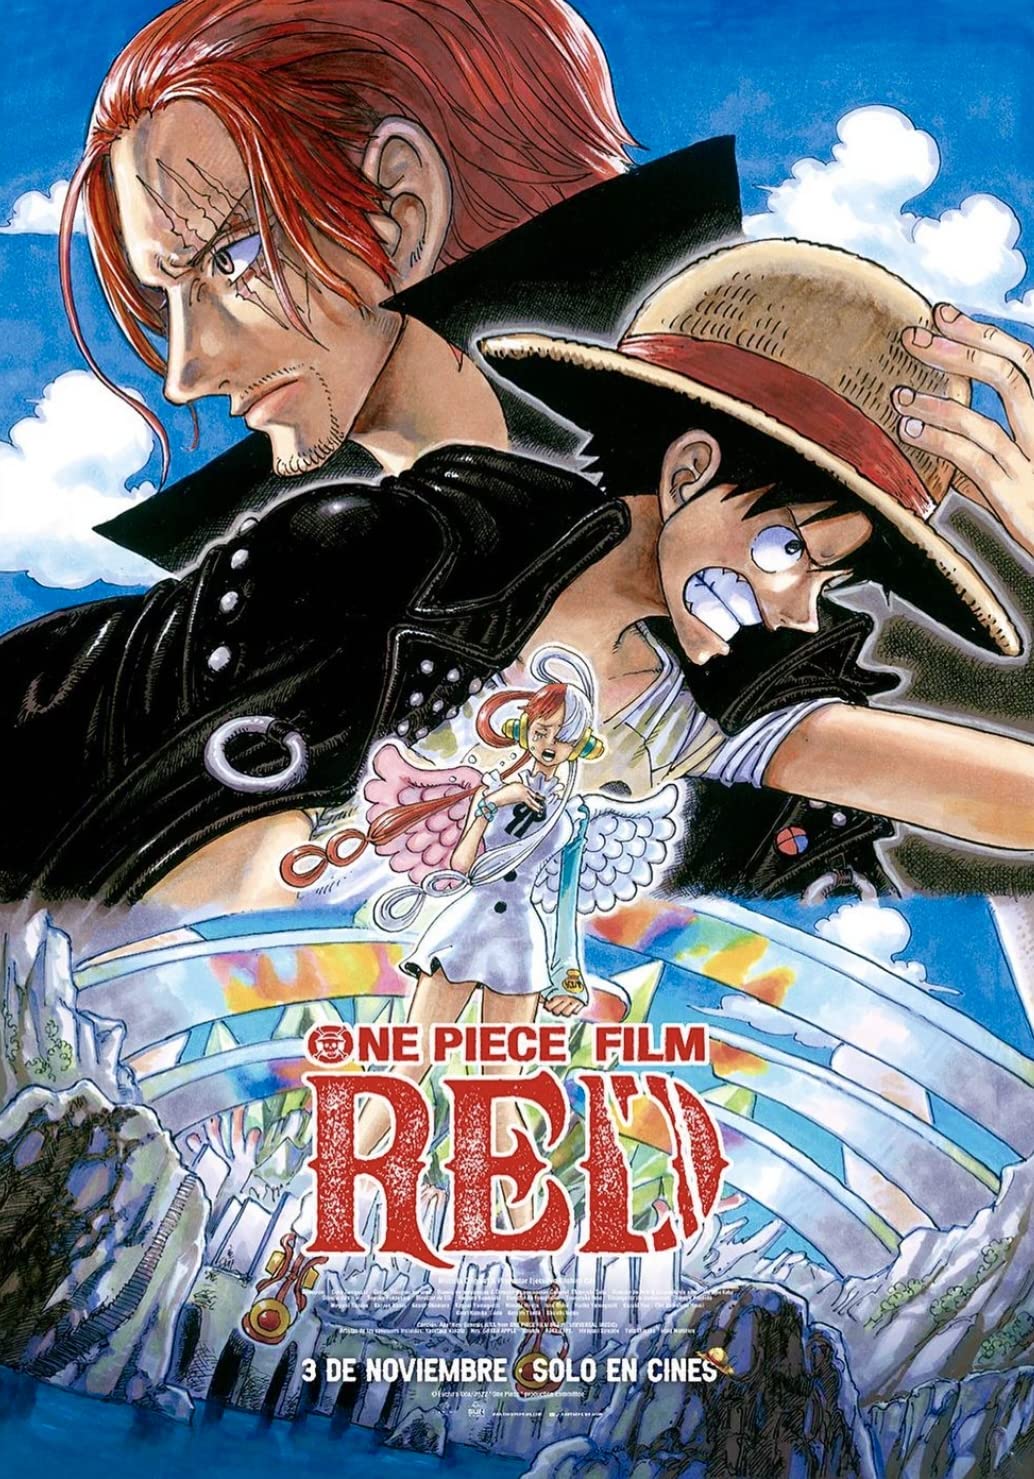 Download One Piece Film: Red (2022) Hindi Dubbed Movie HDCAM 1080p | 720p | 480p [350MB] download